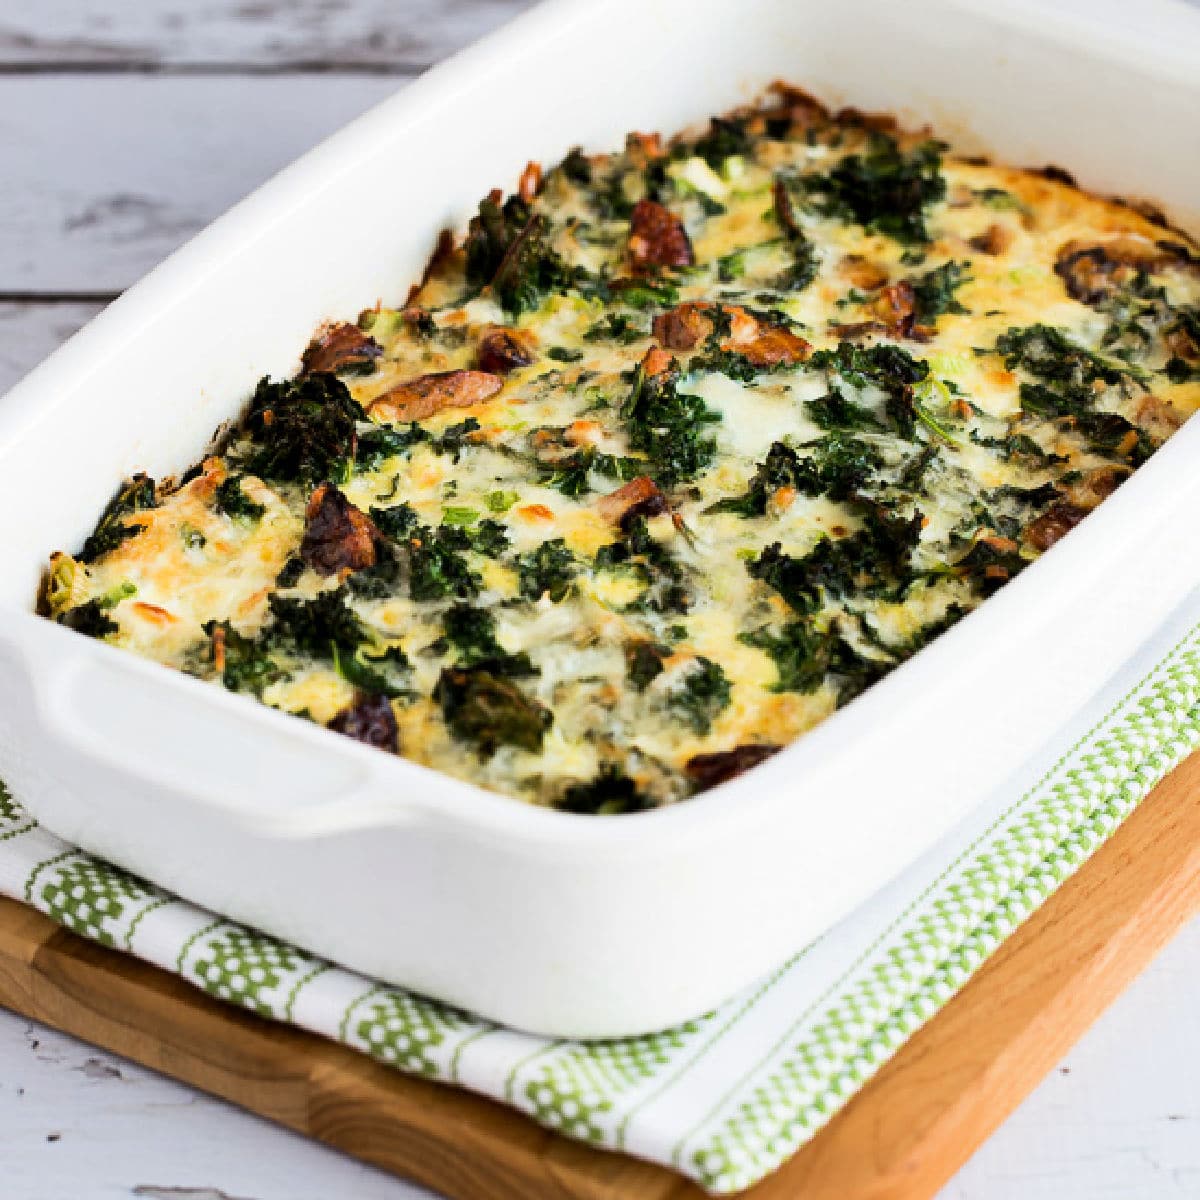 Square image for Sausage, Kale, and Mozzarella Egg Bake shown in baking dish on napkin and cutting board.